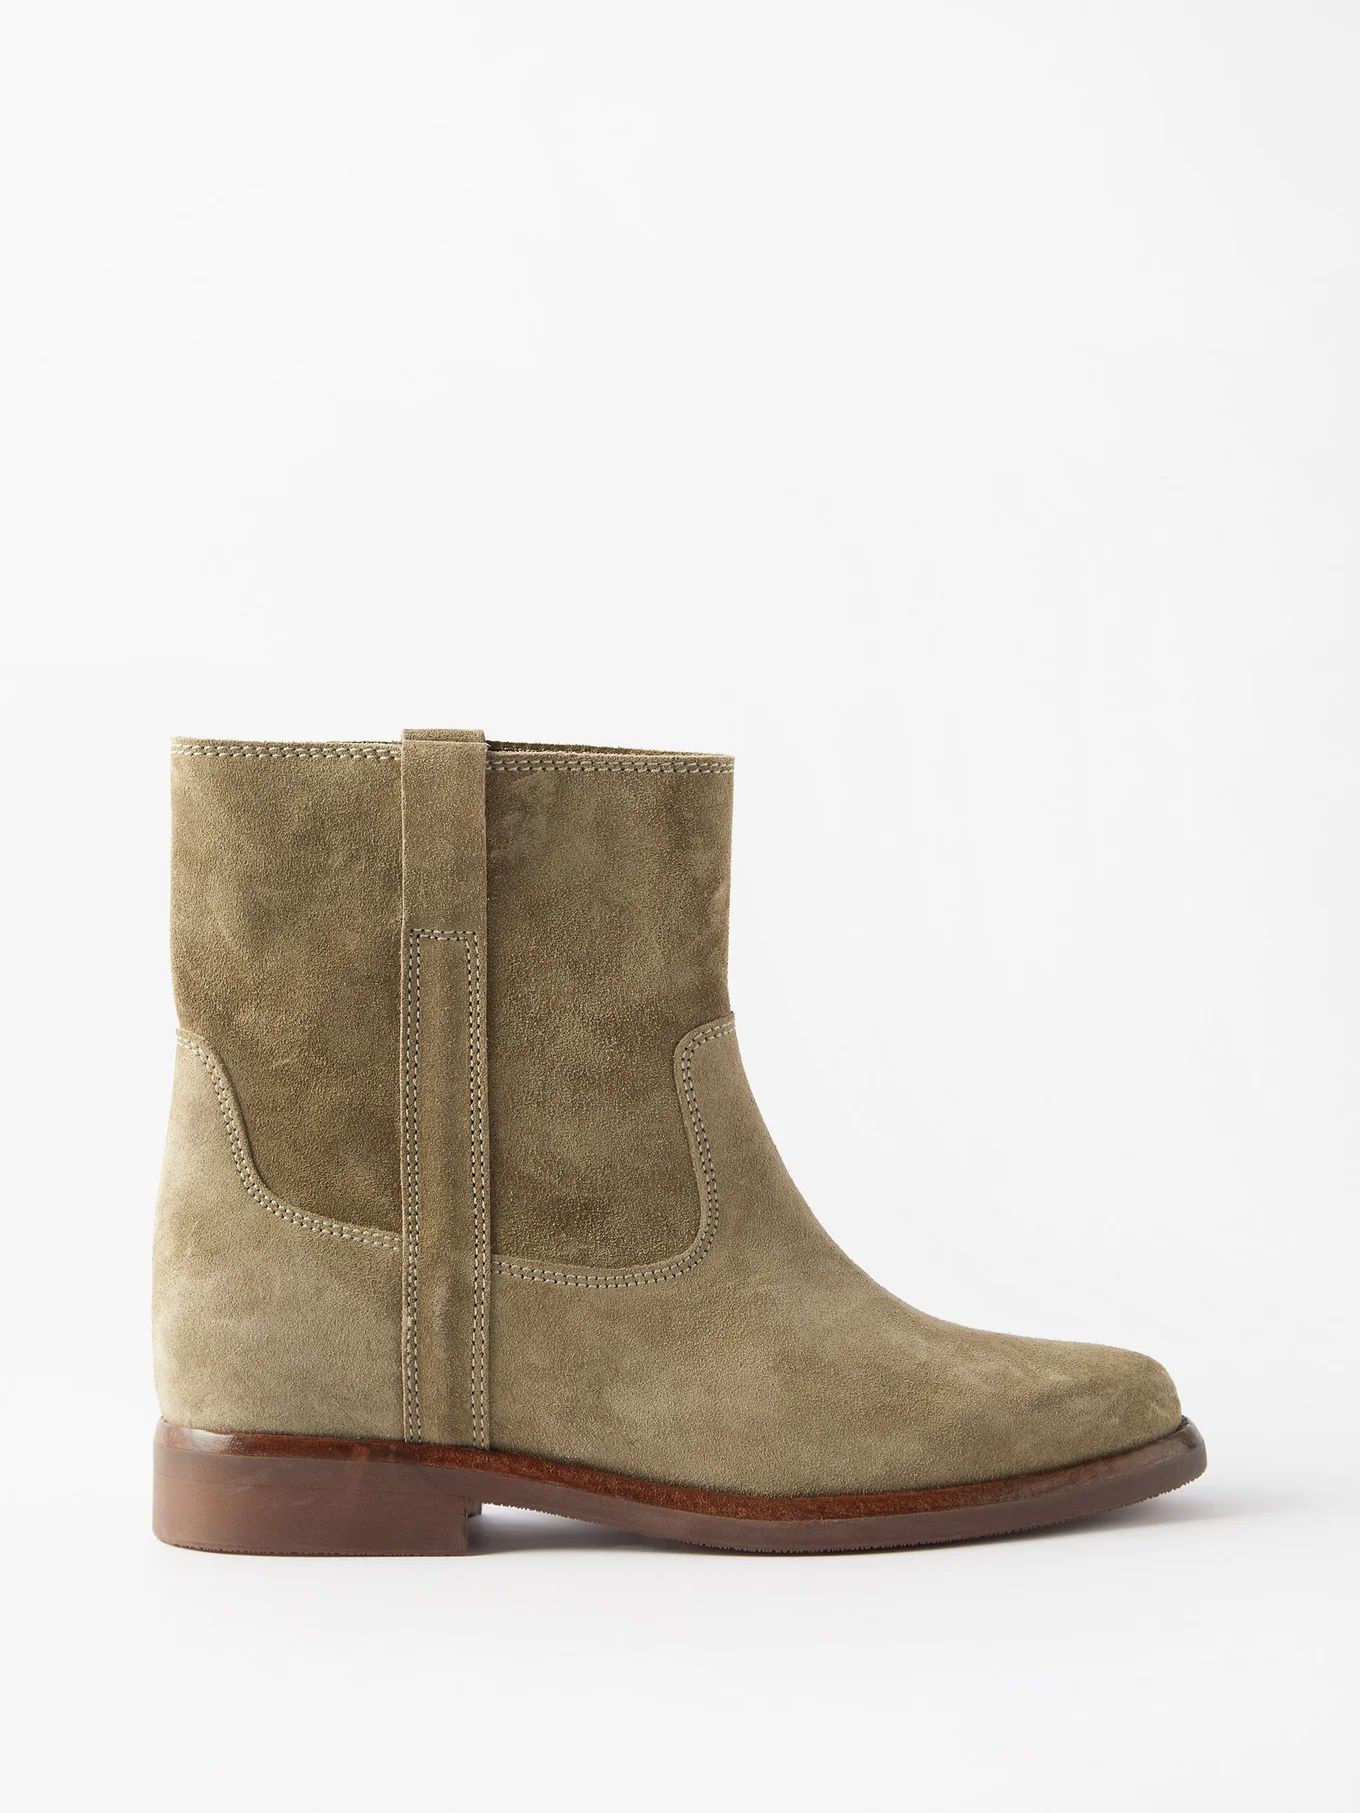 Susee suede ankle boots | Isabel Marant | Matches (EU)